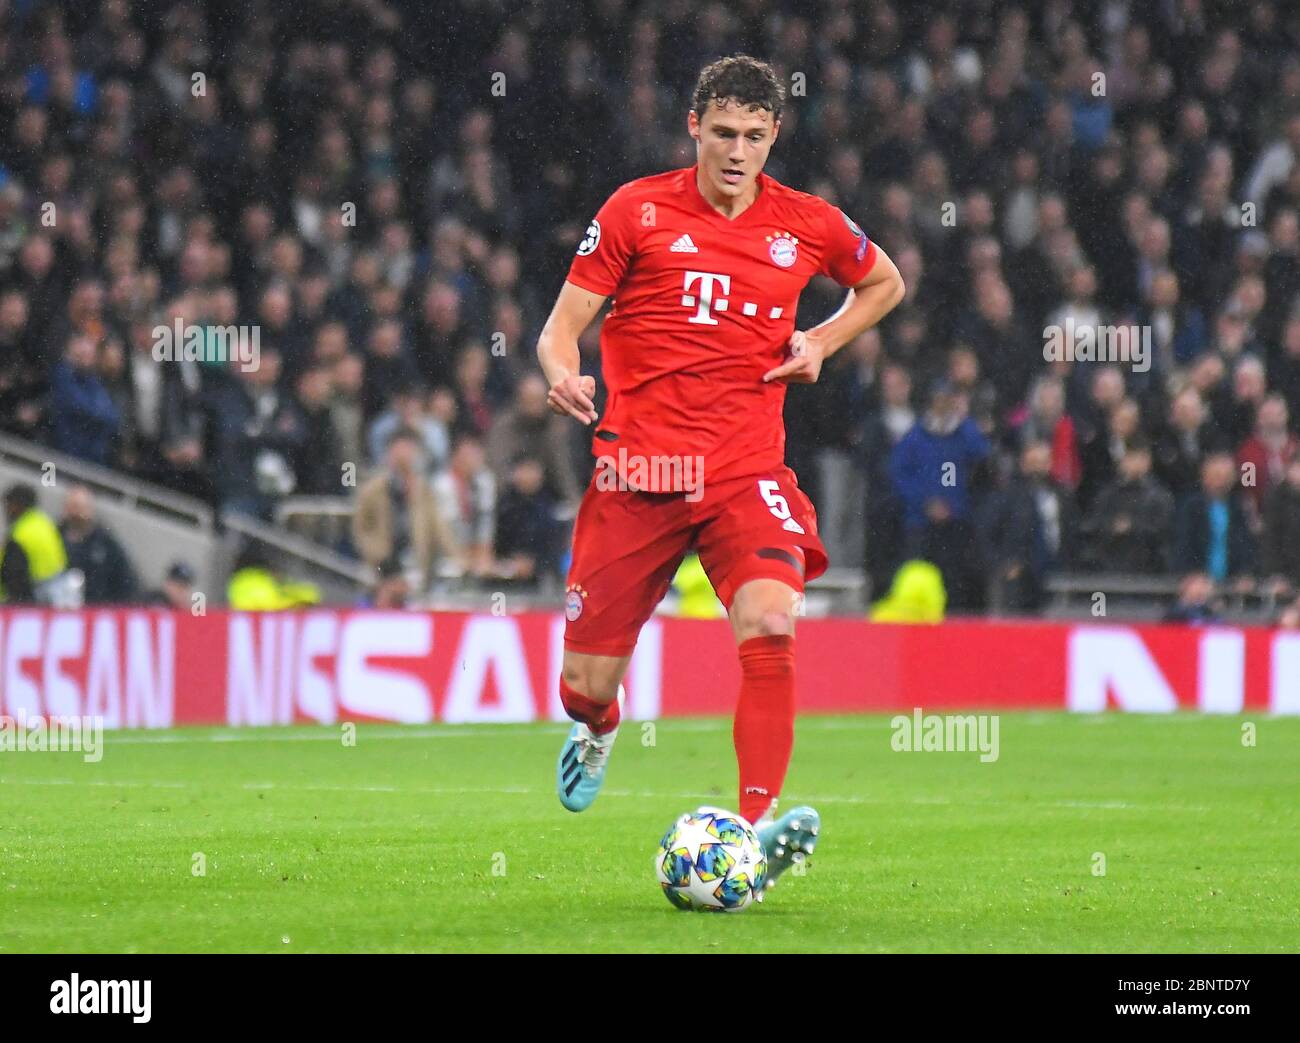 LONDON, ENGLAND - OCTOBER 1, 2019: Benjamin Pavard of Bayern pictured during the 2019/20 UEFA Champions League Group B game between Tottenham Hotspur FC (England) and Bayern Munchen (Germany) at Tottenham Hotspur Stadium. Stock Photo